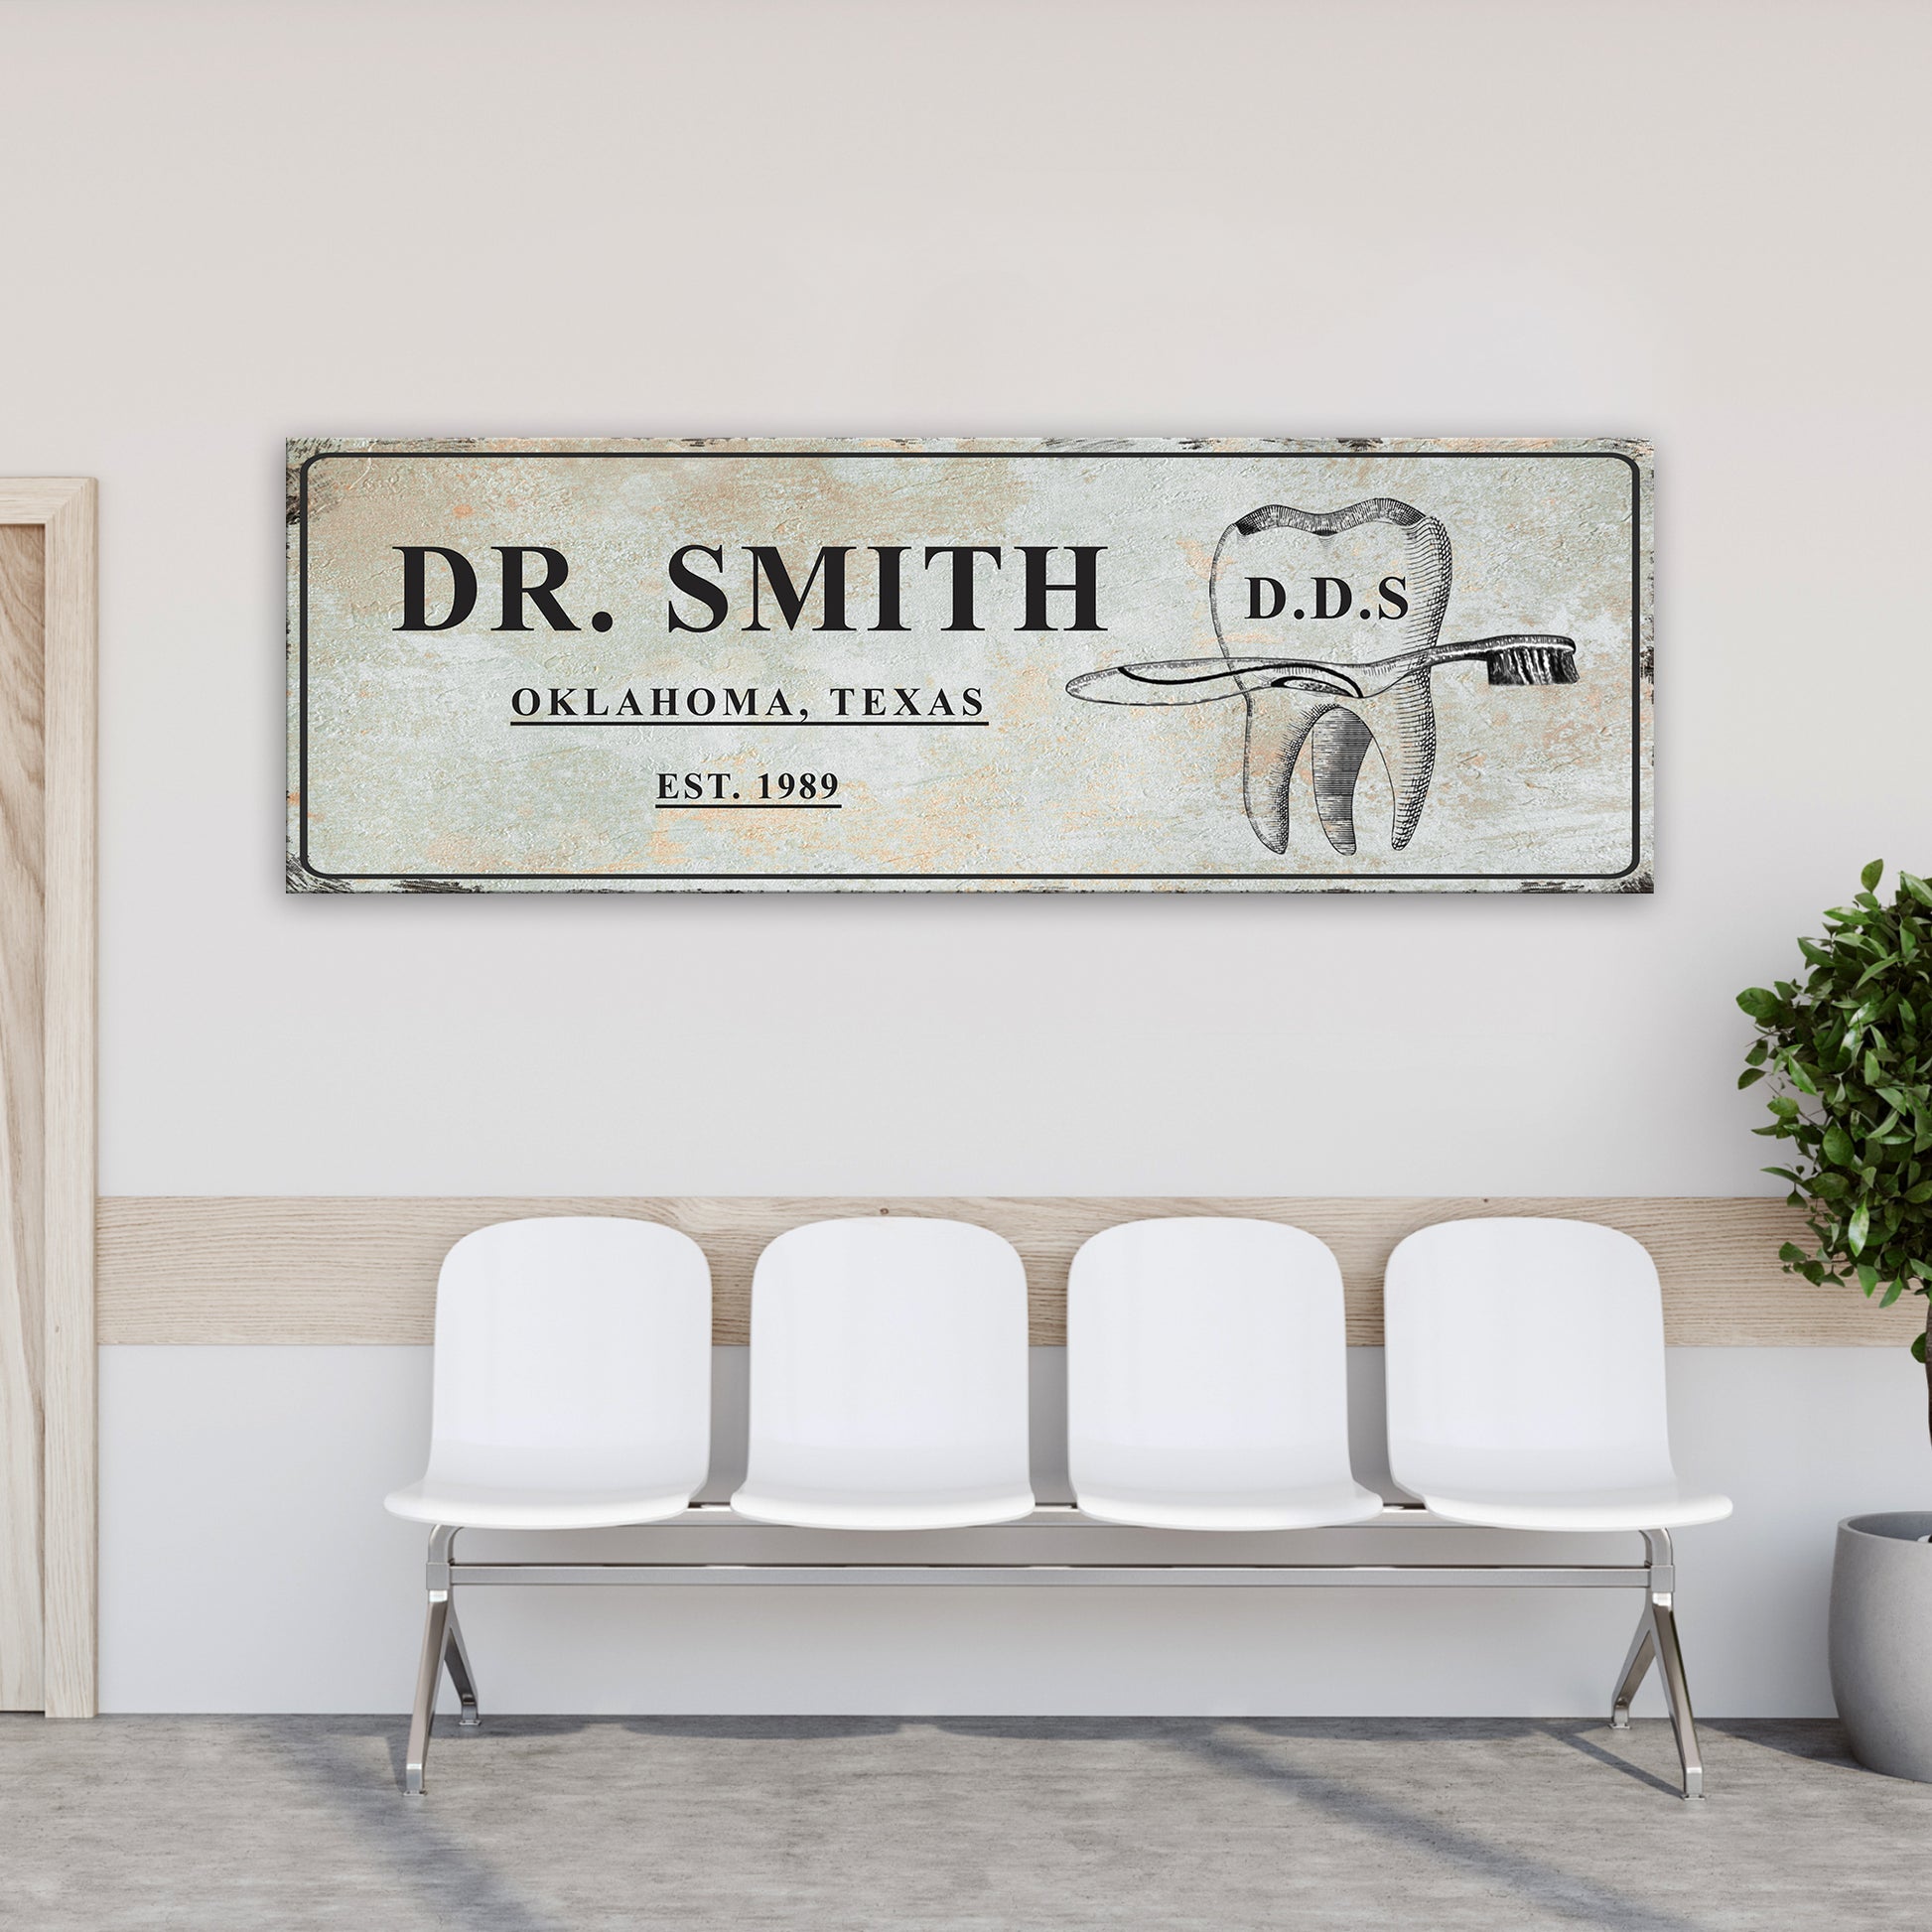 Dental Practice Sign - Image by Tailored Canvases